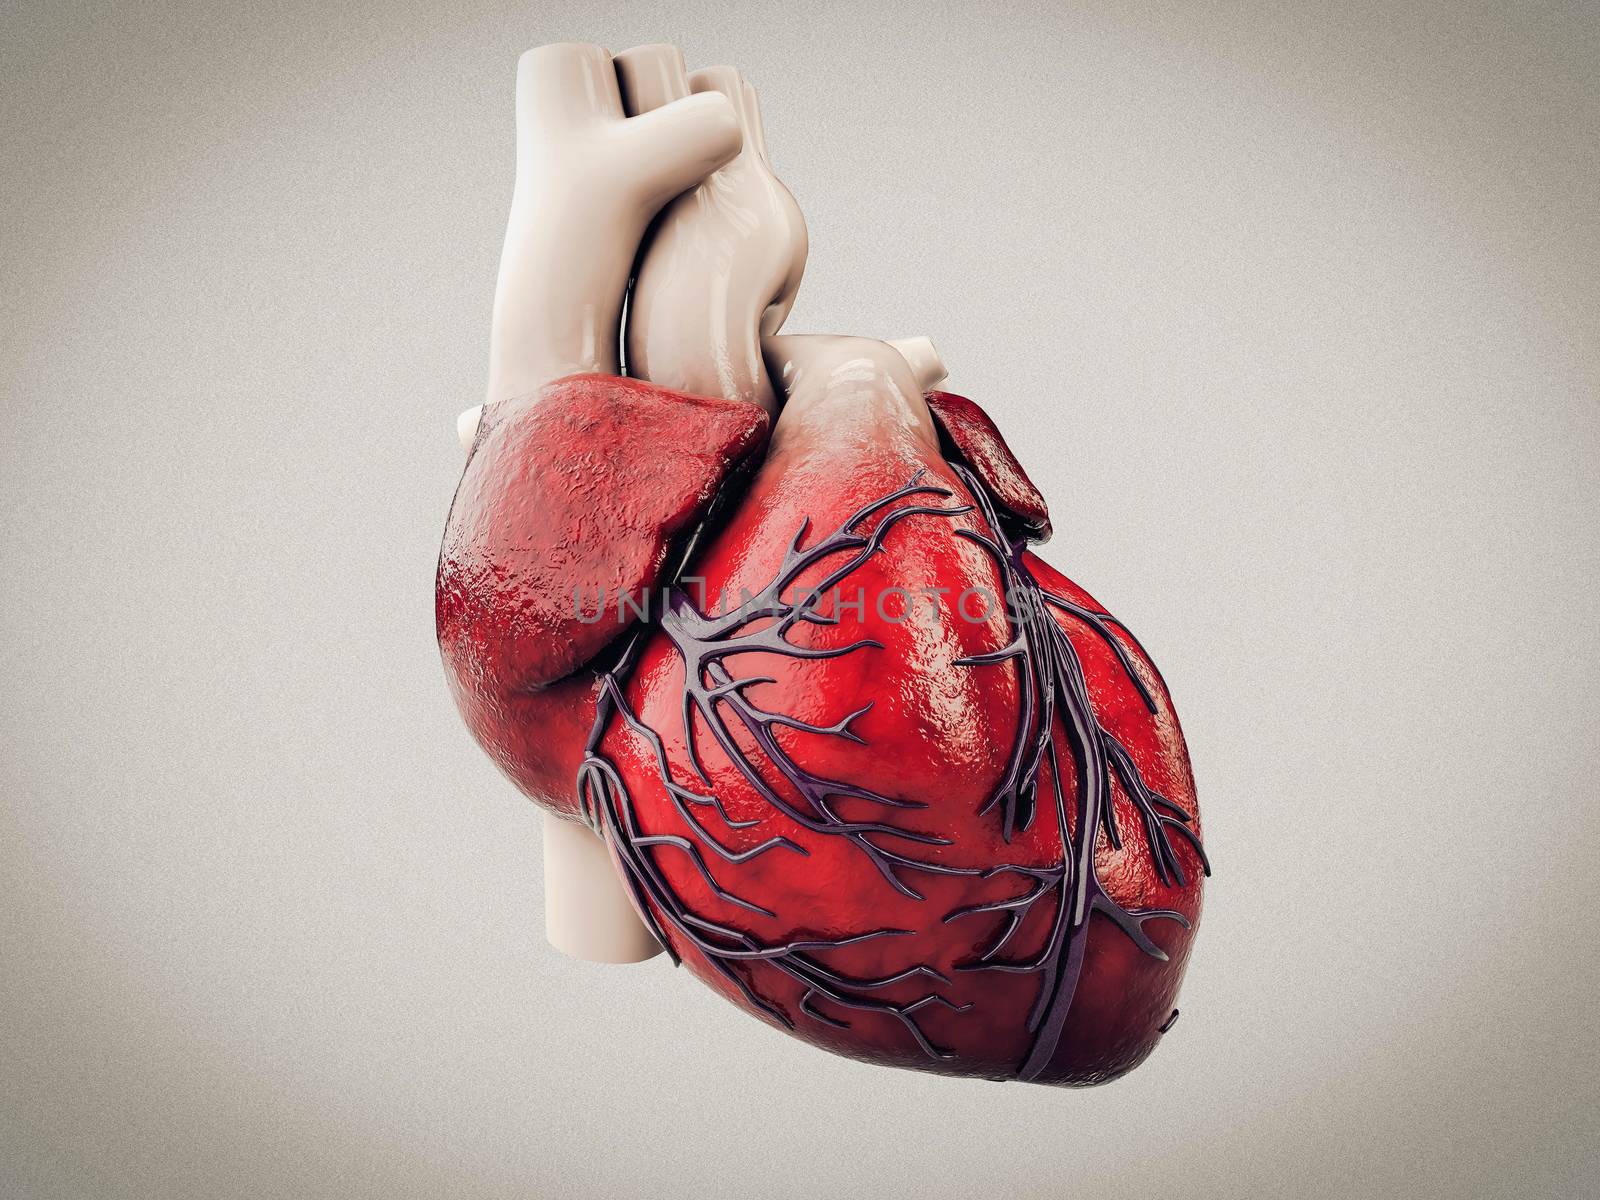 3d Illustration of Anatomy of Human Heart Isolated on gray.